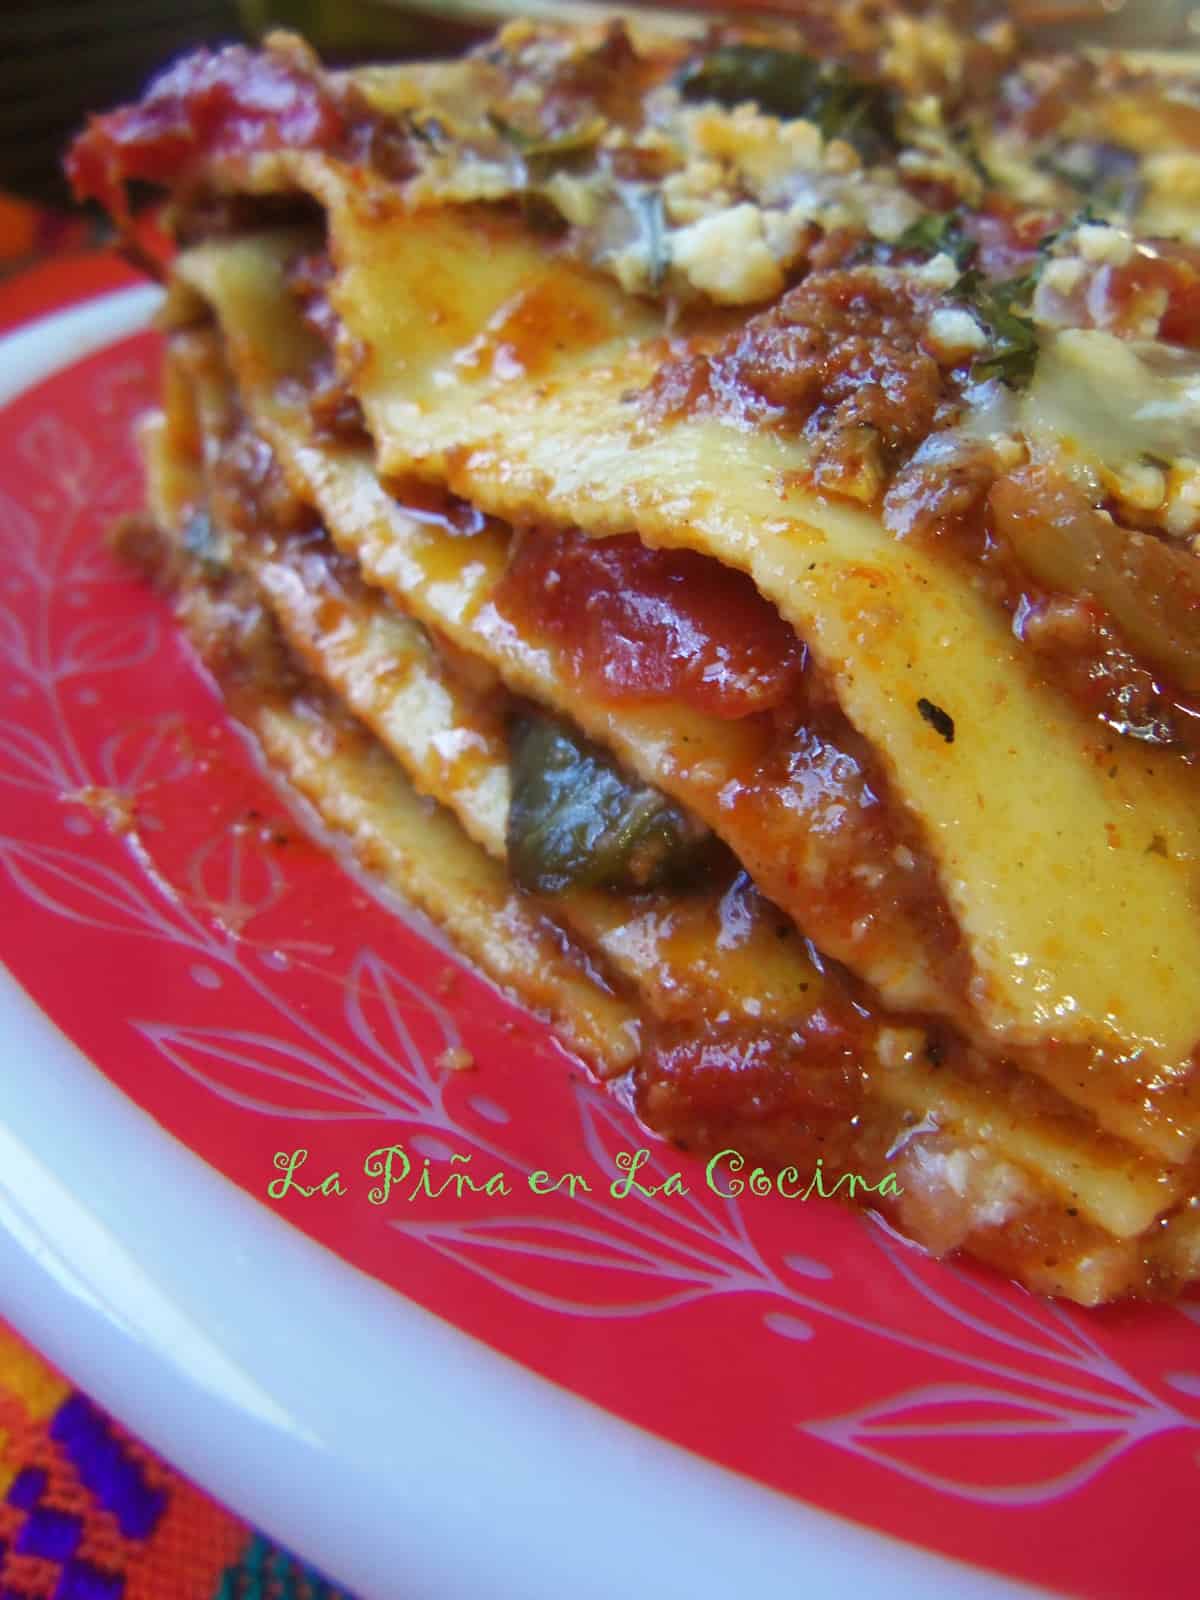 A meat sauce with Mexican flavors to spice up your lasagna recipe.